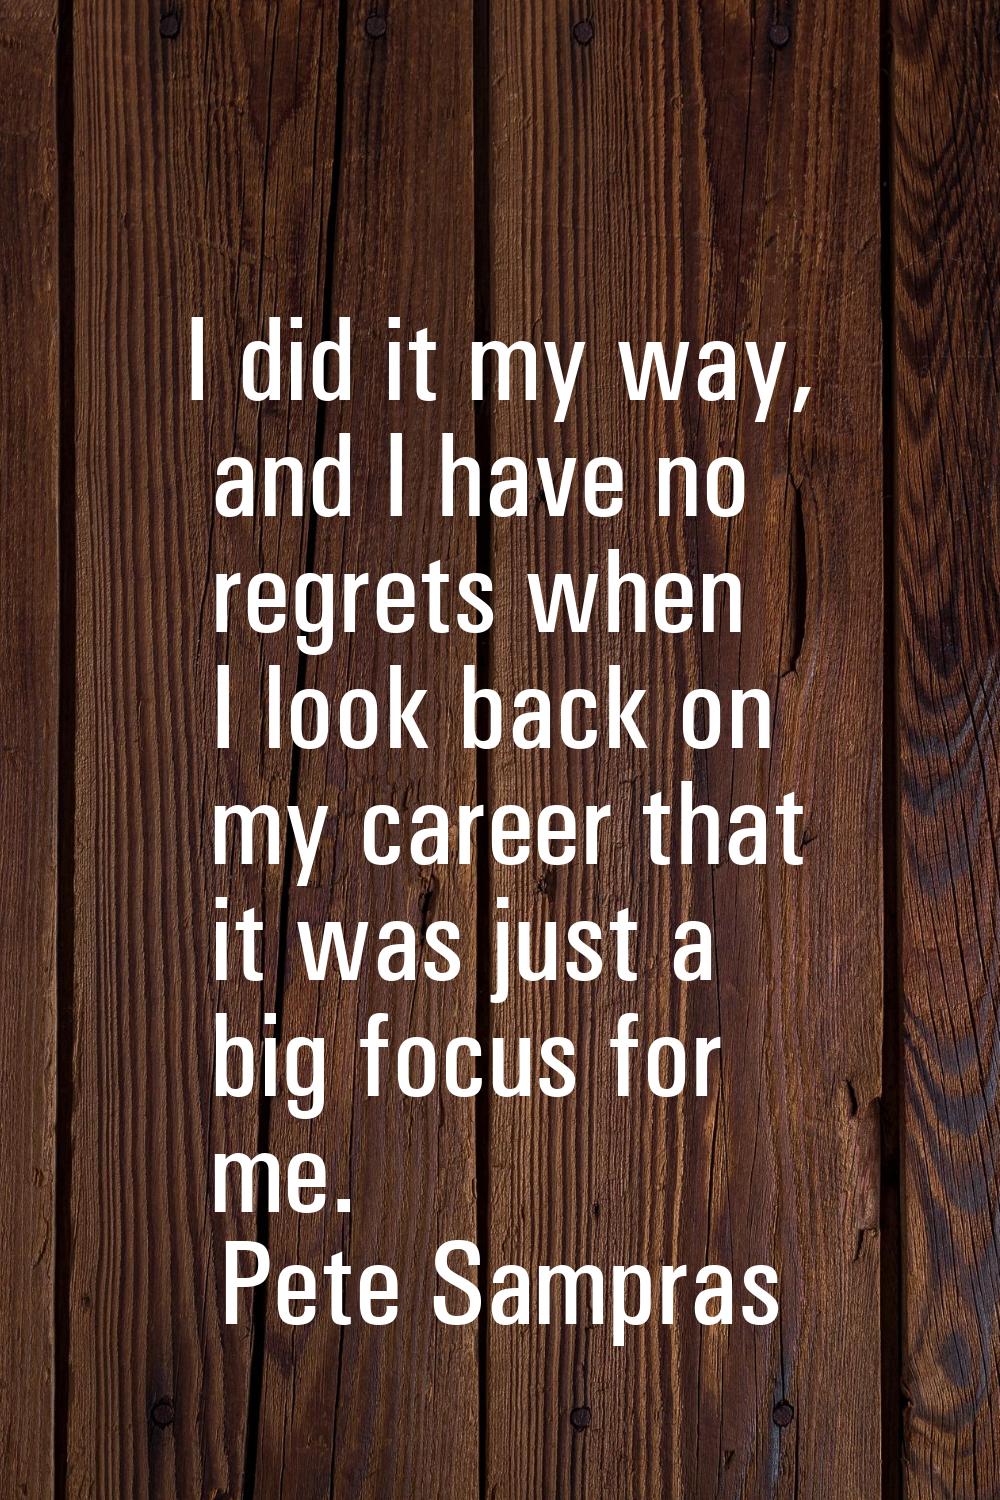 I did it my way, and I have no regrets when I look back on my career that it was just a big focus f